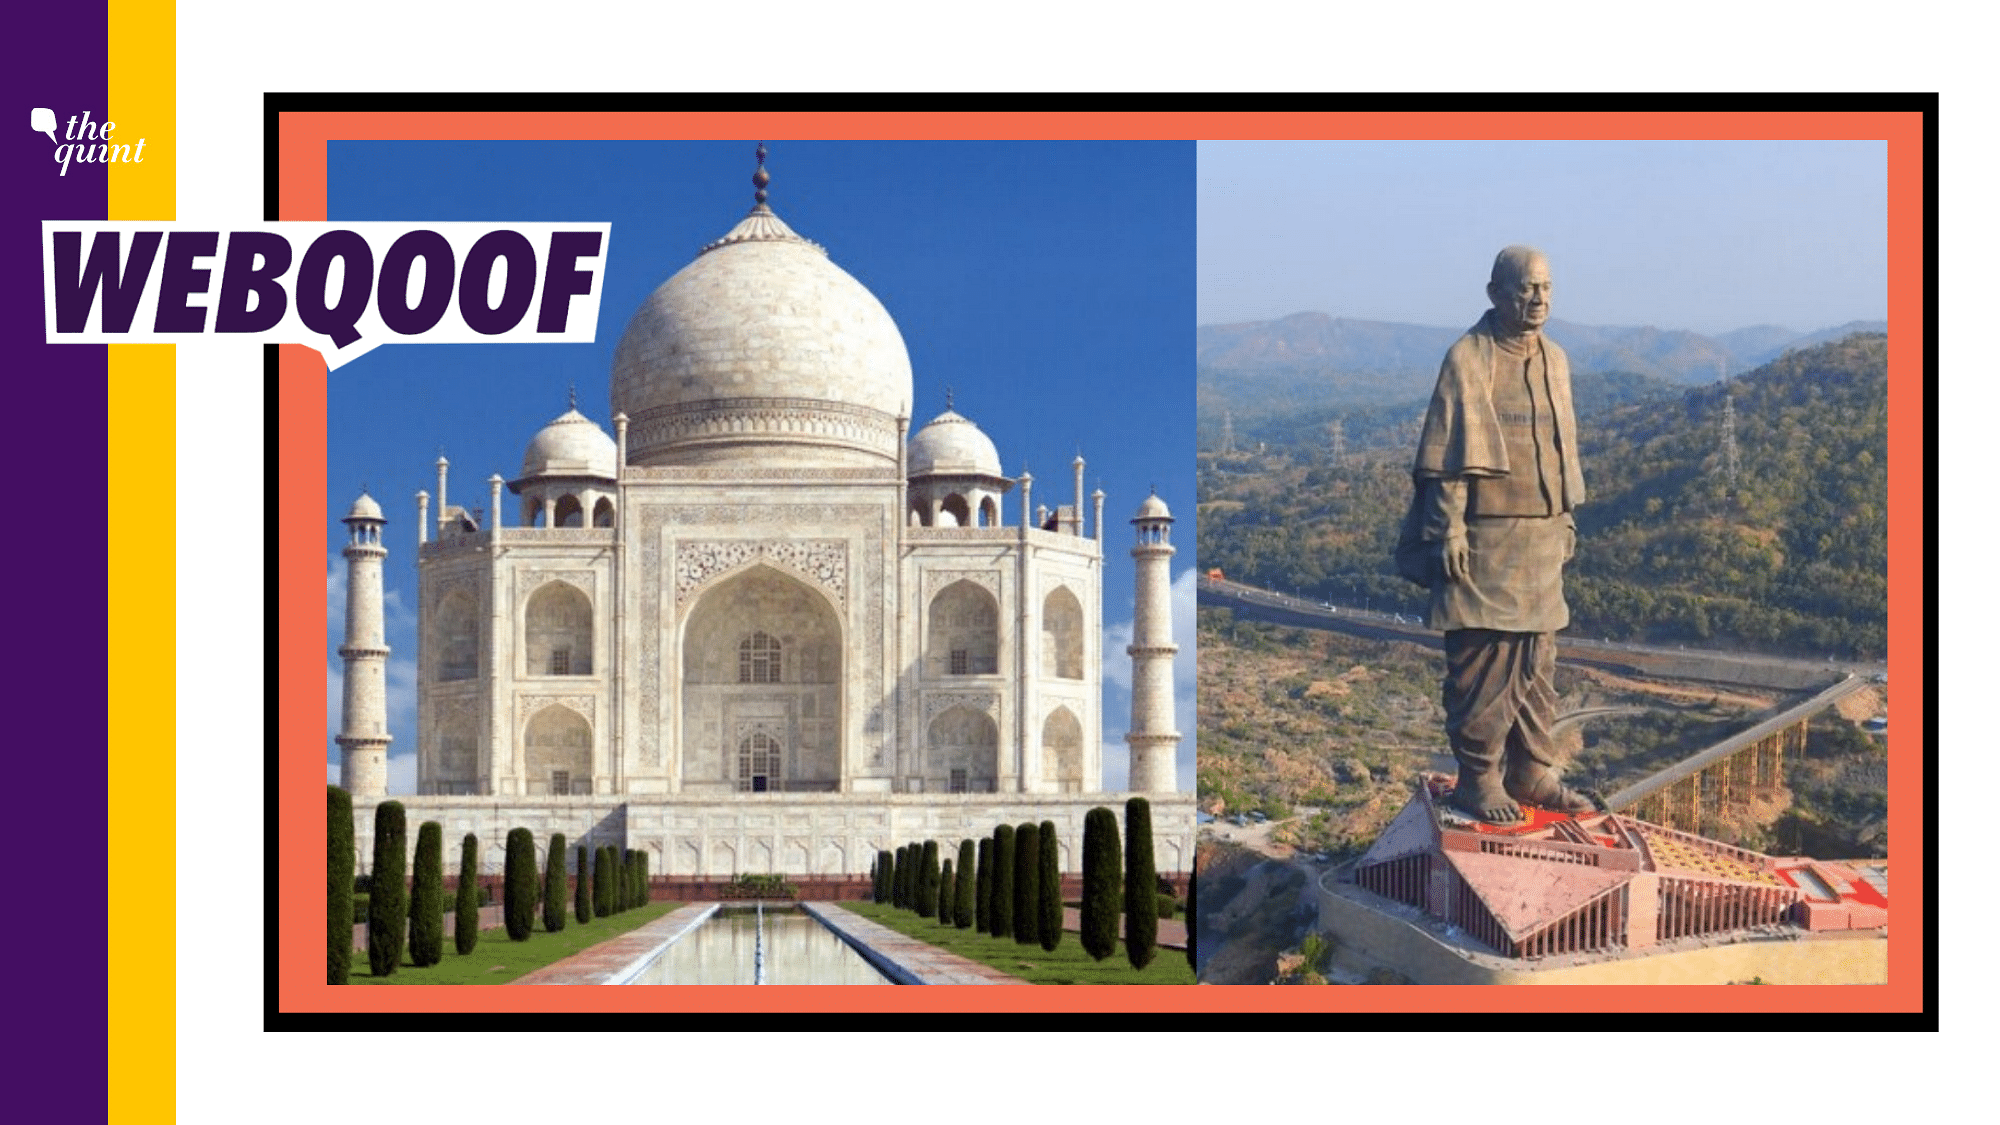 An image on social media falsely claimed that the revenue generated by Statue of Unity has been thrice the annual average revenue of Taj Mahal over the last three years.